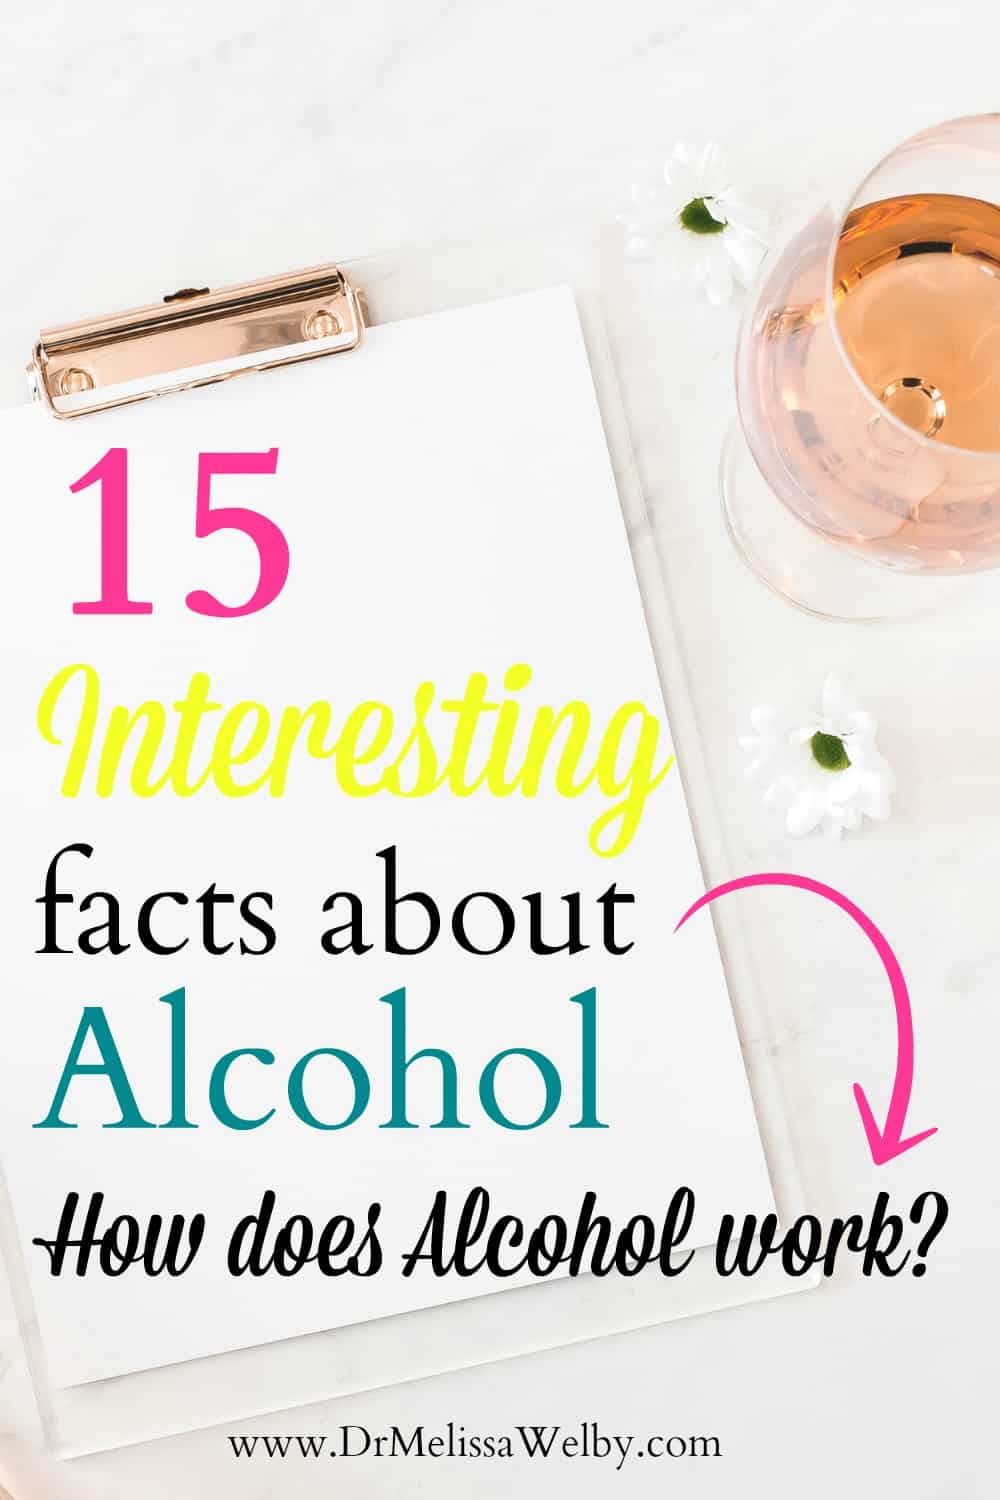 How does alcohol work in the body? Read these 15 interesting facts about alcohol to learn how it is absorbed and processed, how strong is a drink, how much is too much alcohol and when it becomes dangerous, and how long is alcohol in your system.